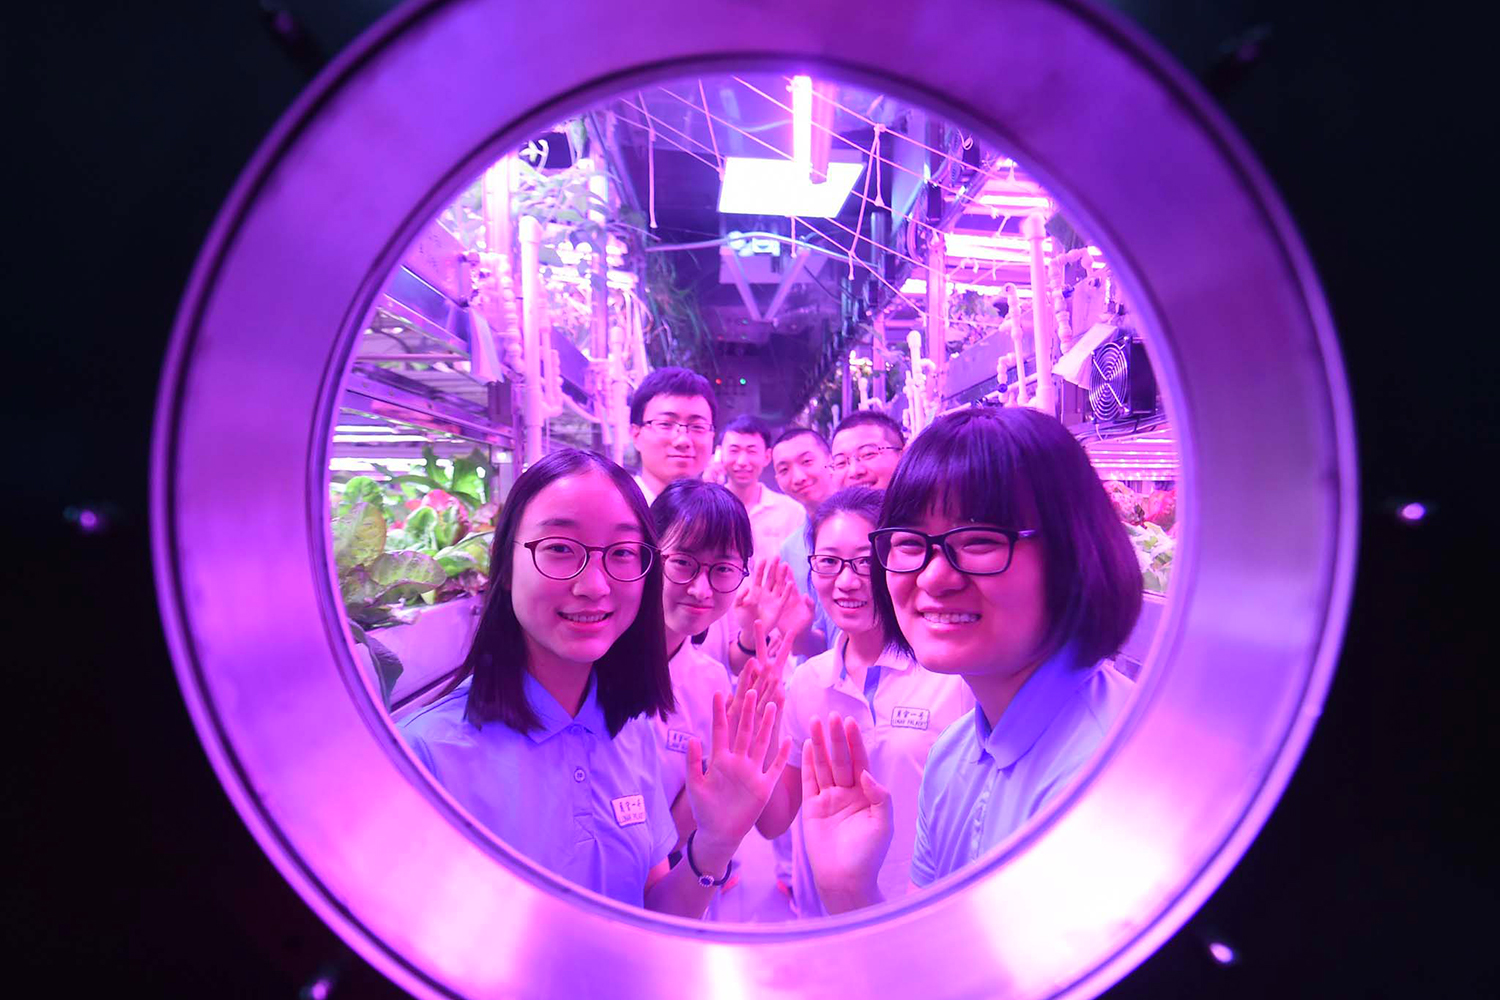 Beihang University volunteers staying in Yuegong-1, also known as Lunar Palace 1